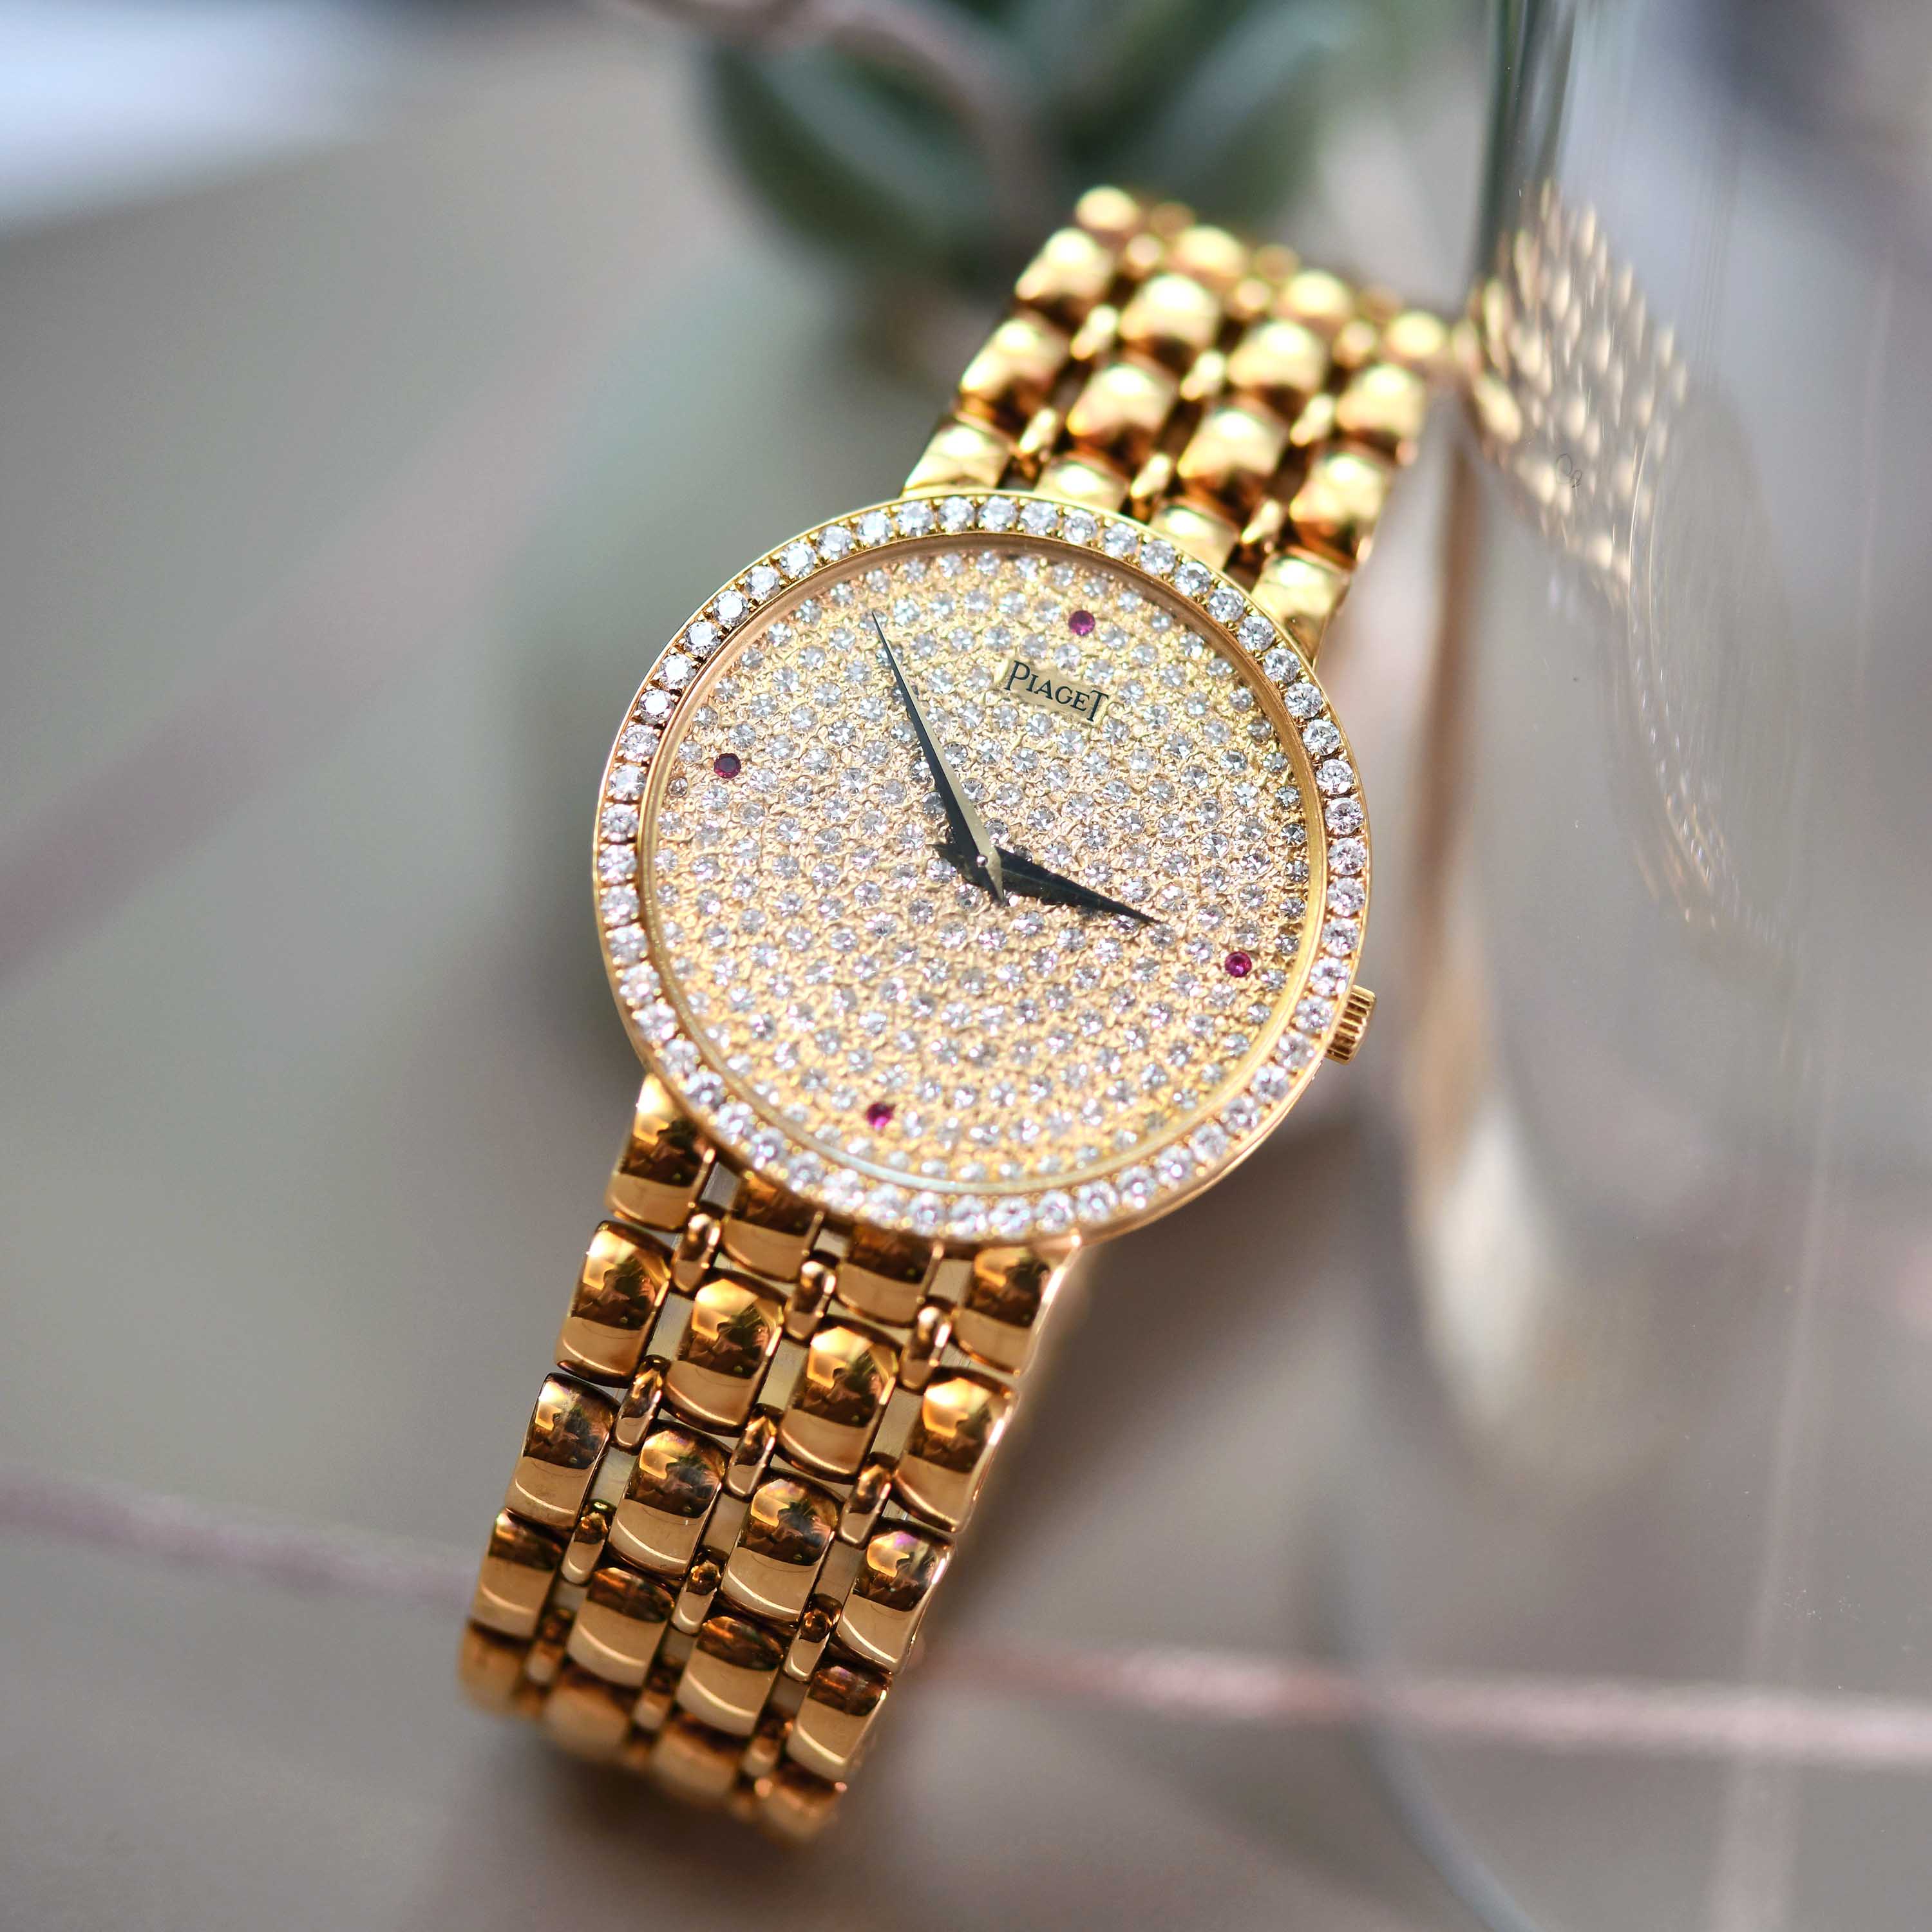 piaget-ref84075-pave-diamond-dial-ruby-indexes-yg-bracelet-img-main2